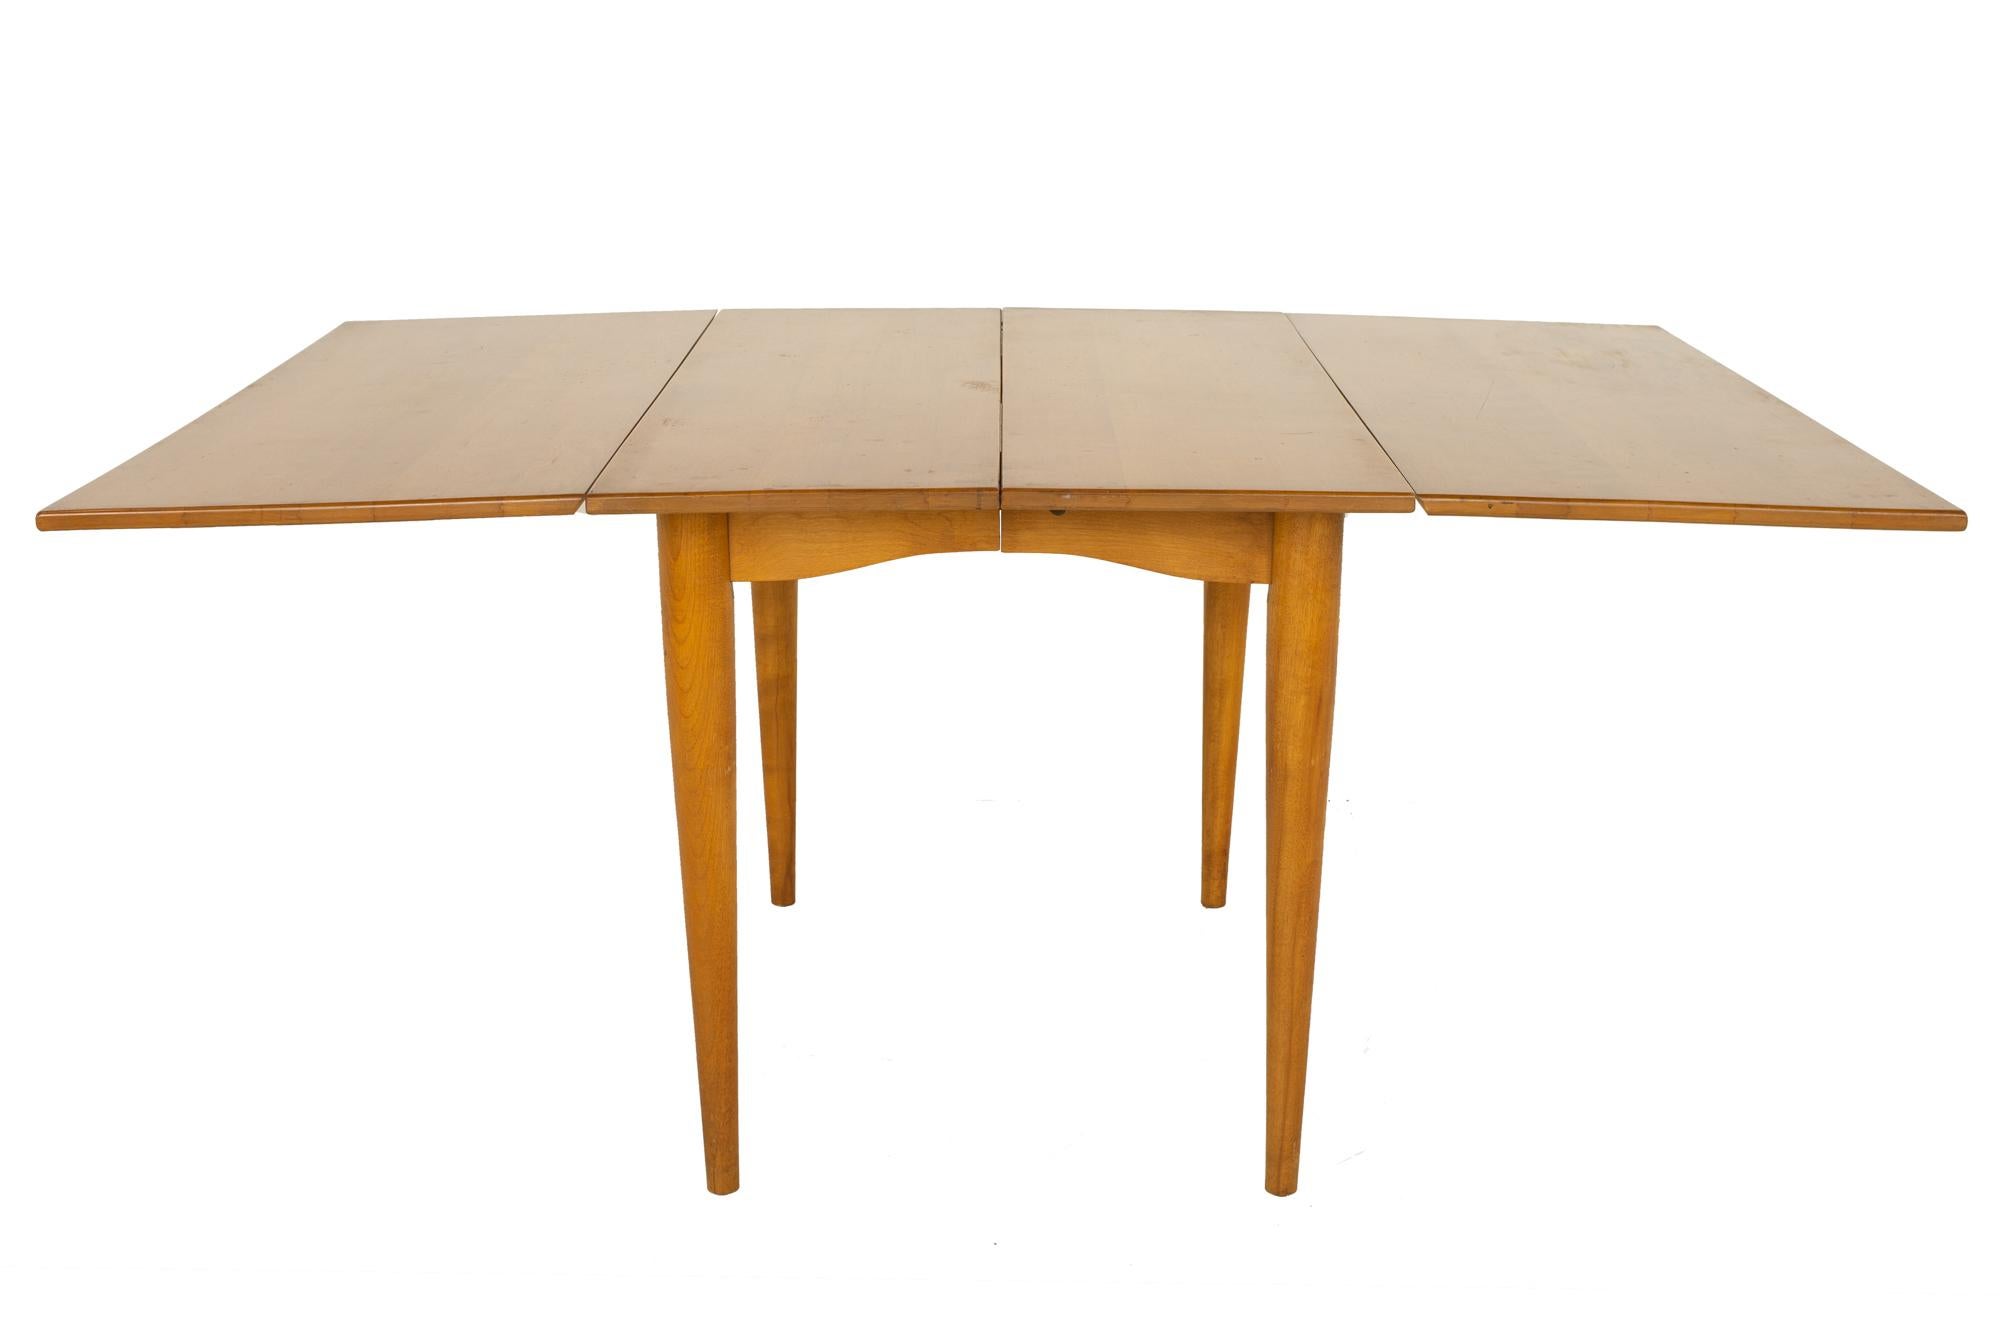 Conant Ball mid century drop leaf maple dining table with 2 leaves

Table measures: 66.25 wide x 42 deep x 29.25 inches high, with a chair clearance of 25 inches

?All pieces of furniture can be had in what we call restored vintage condition.